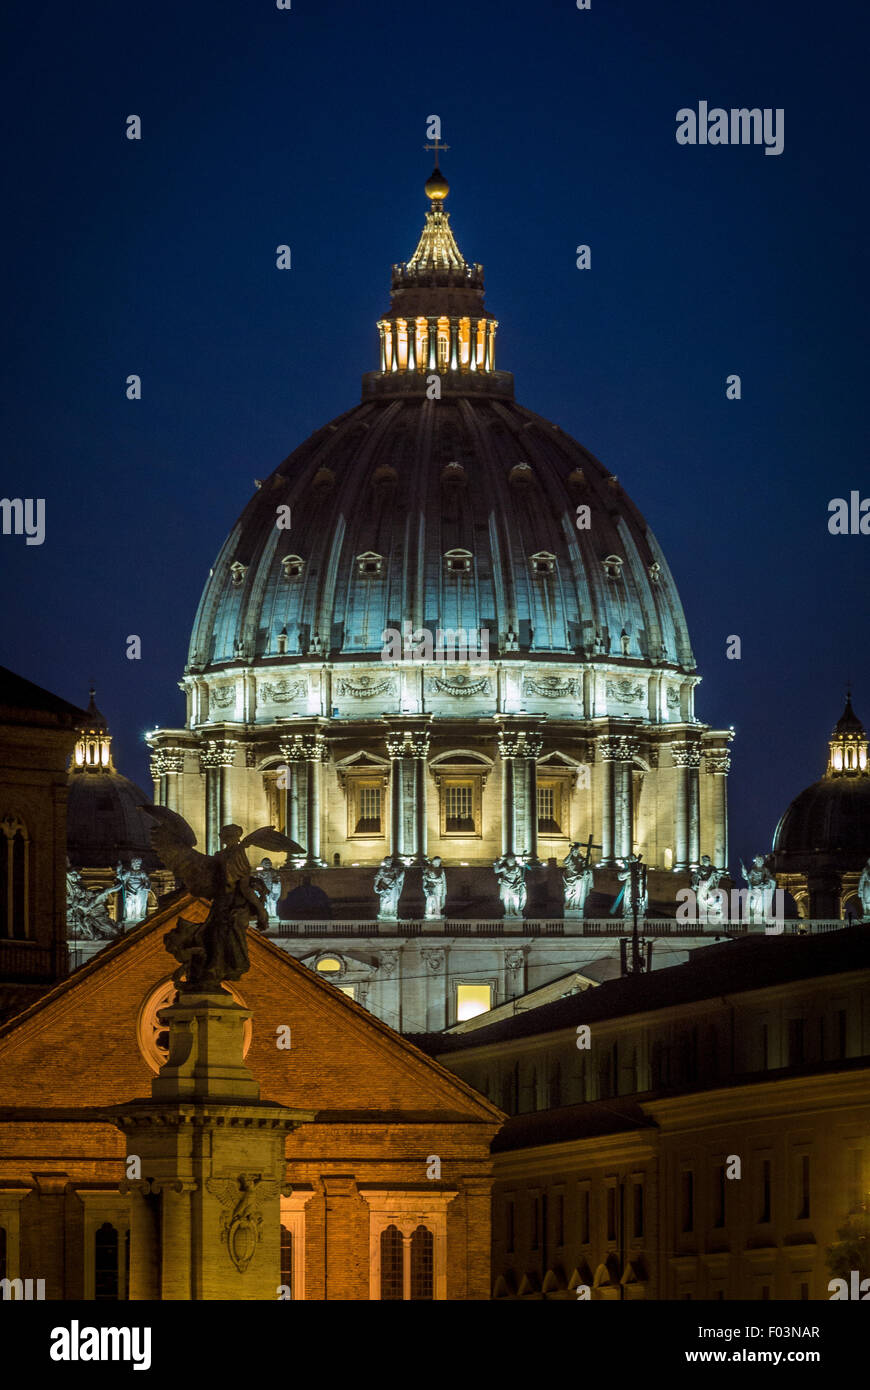 St Peter's Basilica. Vatican City at night, Rome. Italy. Stock Photo